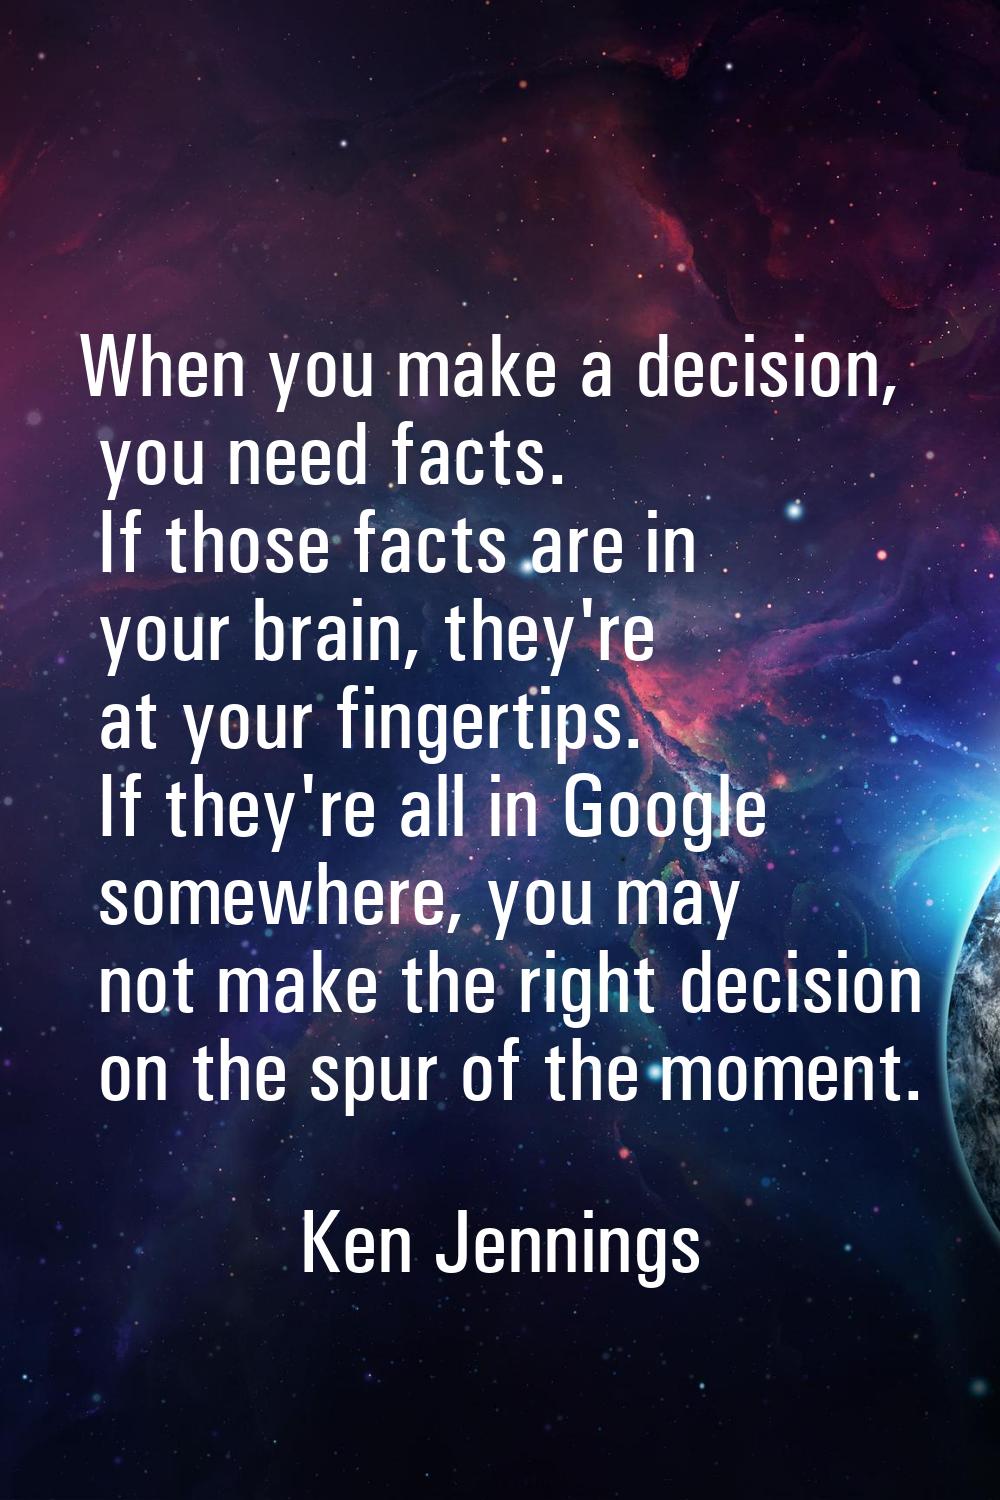 When you make a decision, you need facts. If those facts are in your brain, they're at your fingert